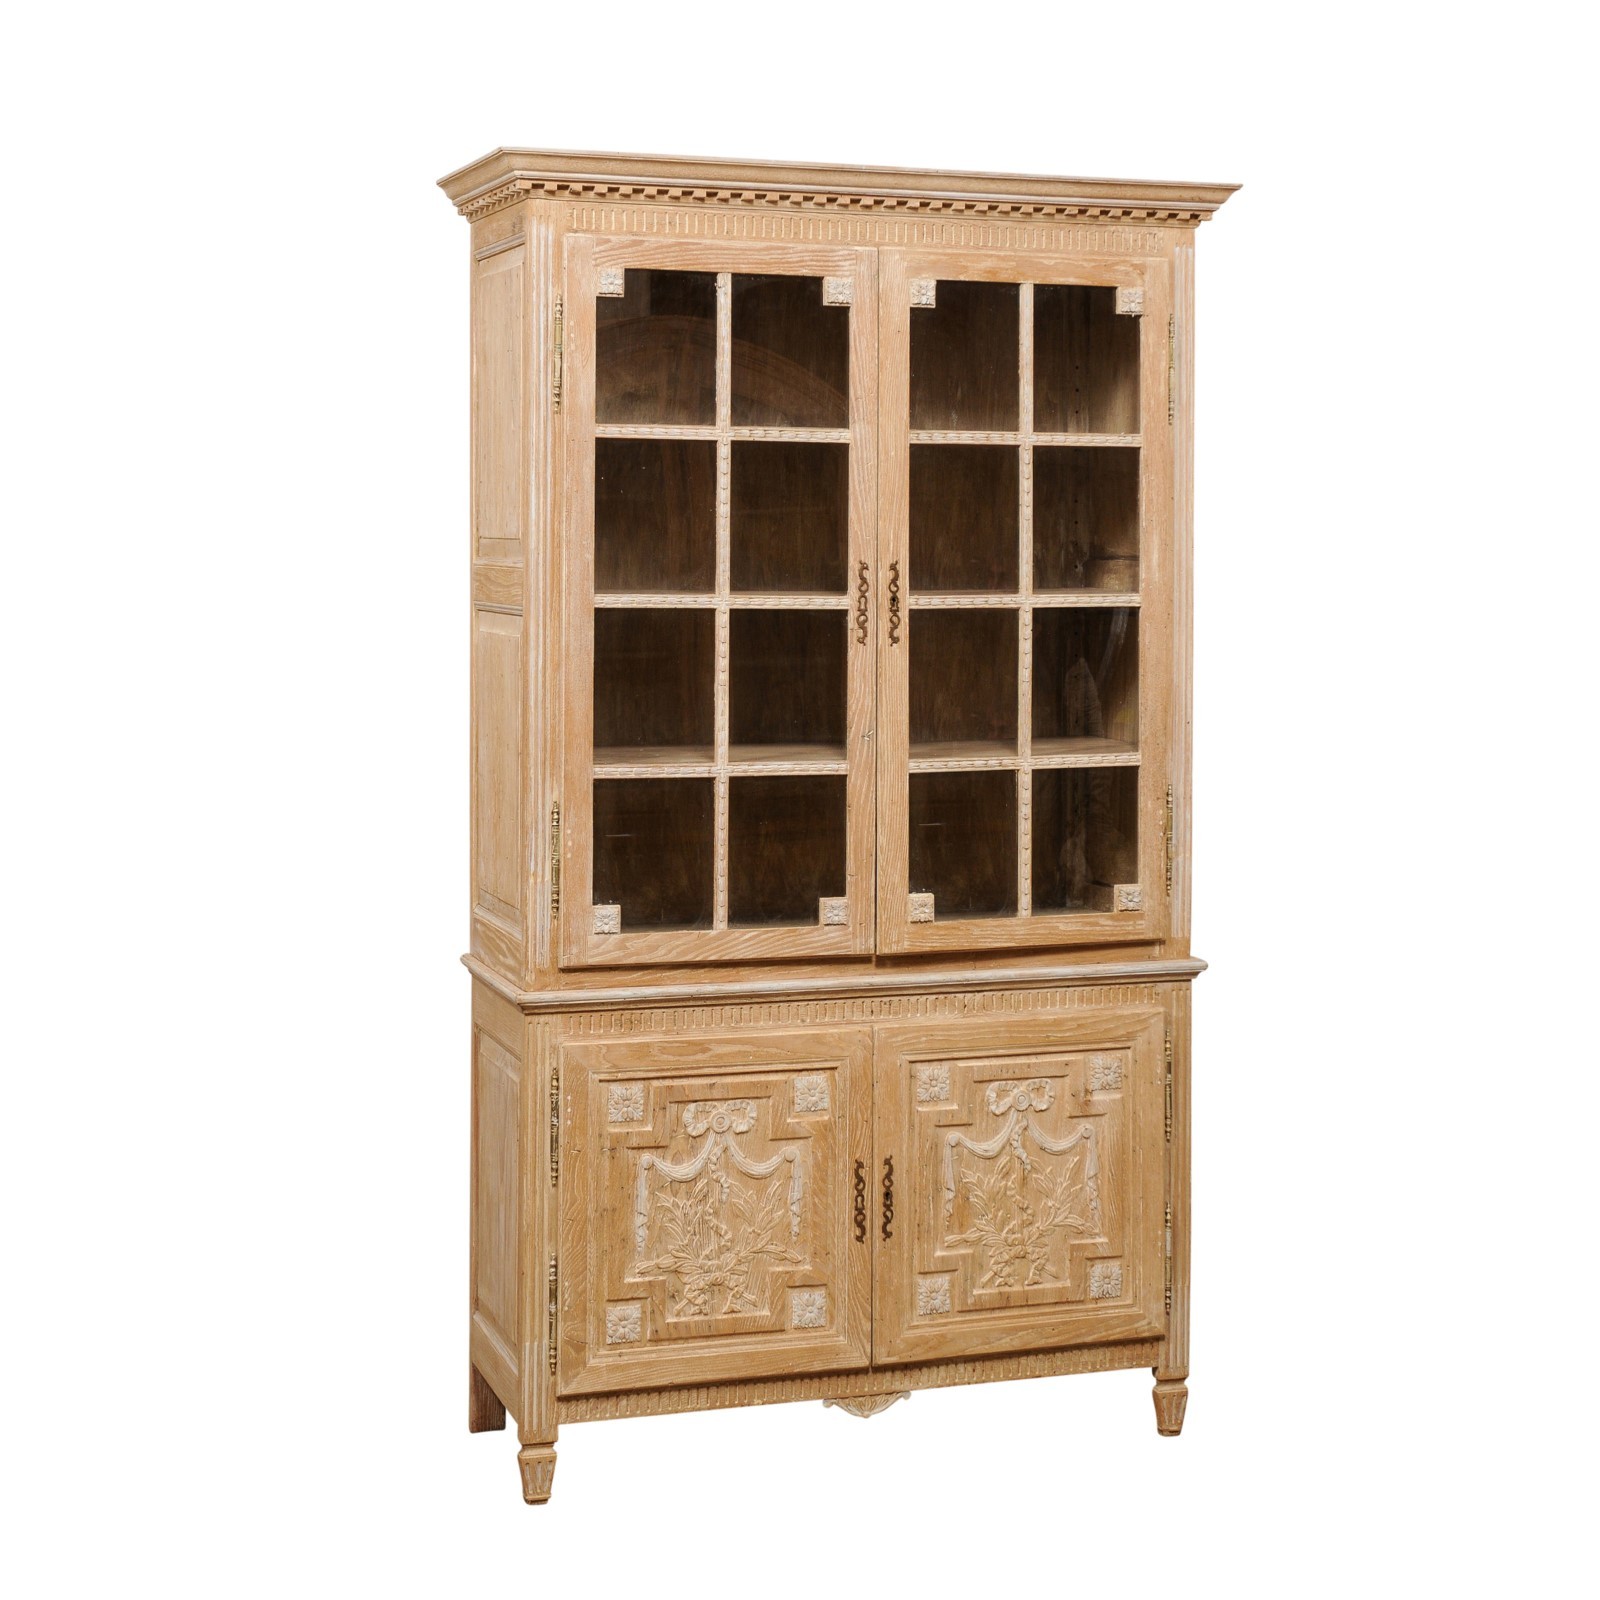 French Tall Neoclassical-Style Wood Cabinet